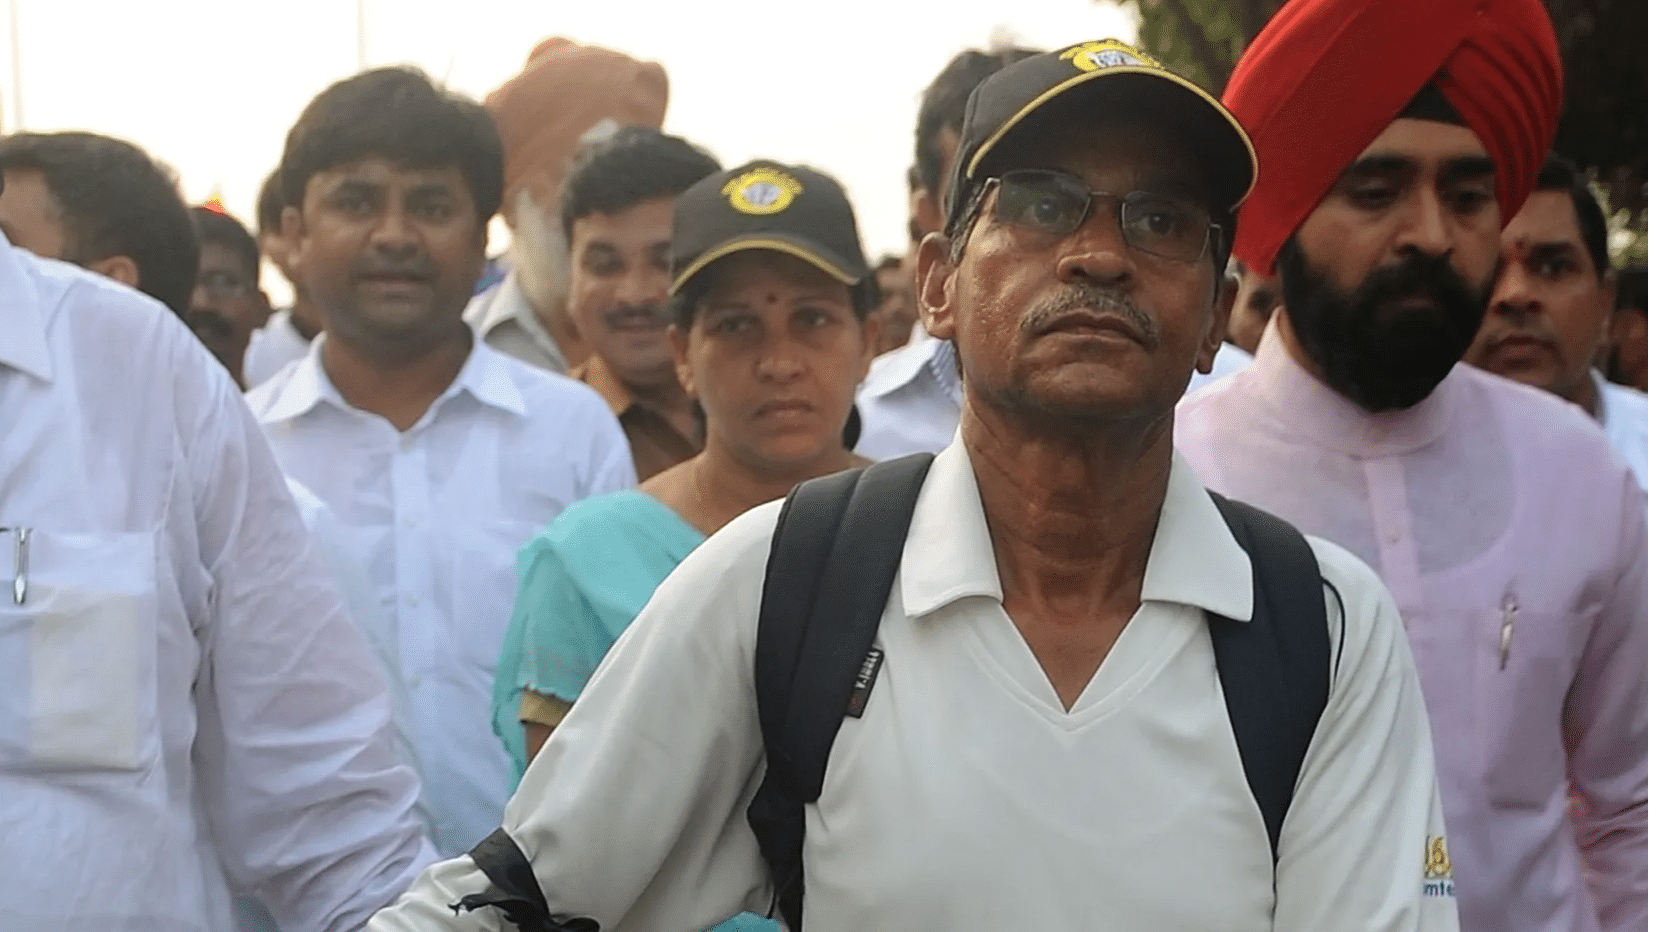 Major Unnikrishnan: 26/11 braveheart used his salary to help others, says his father